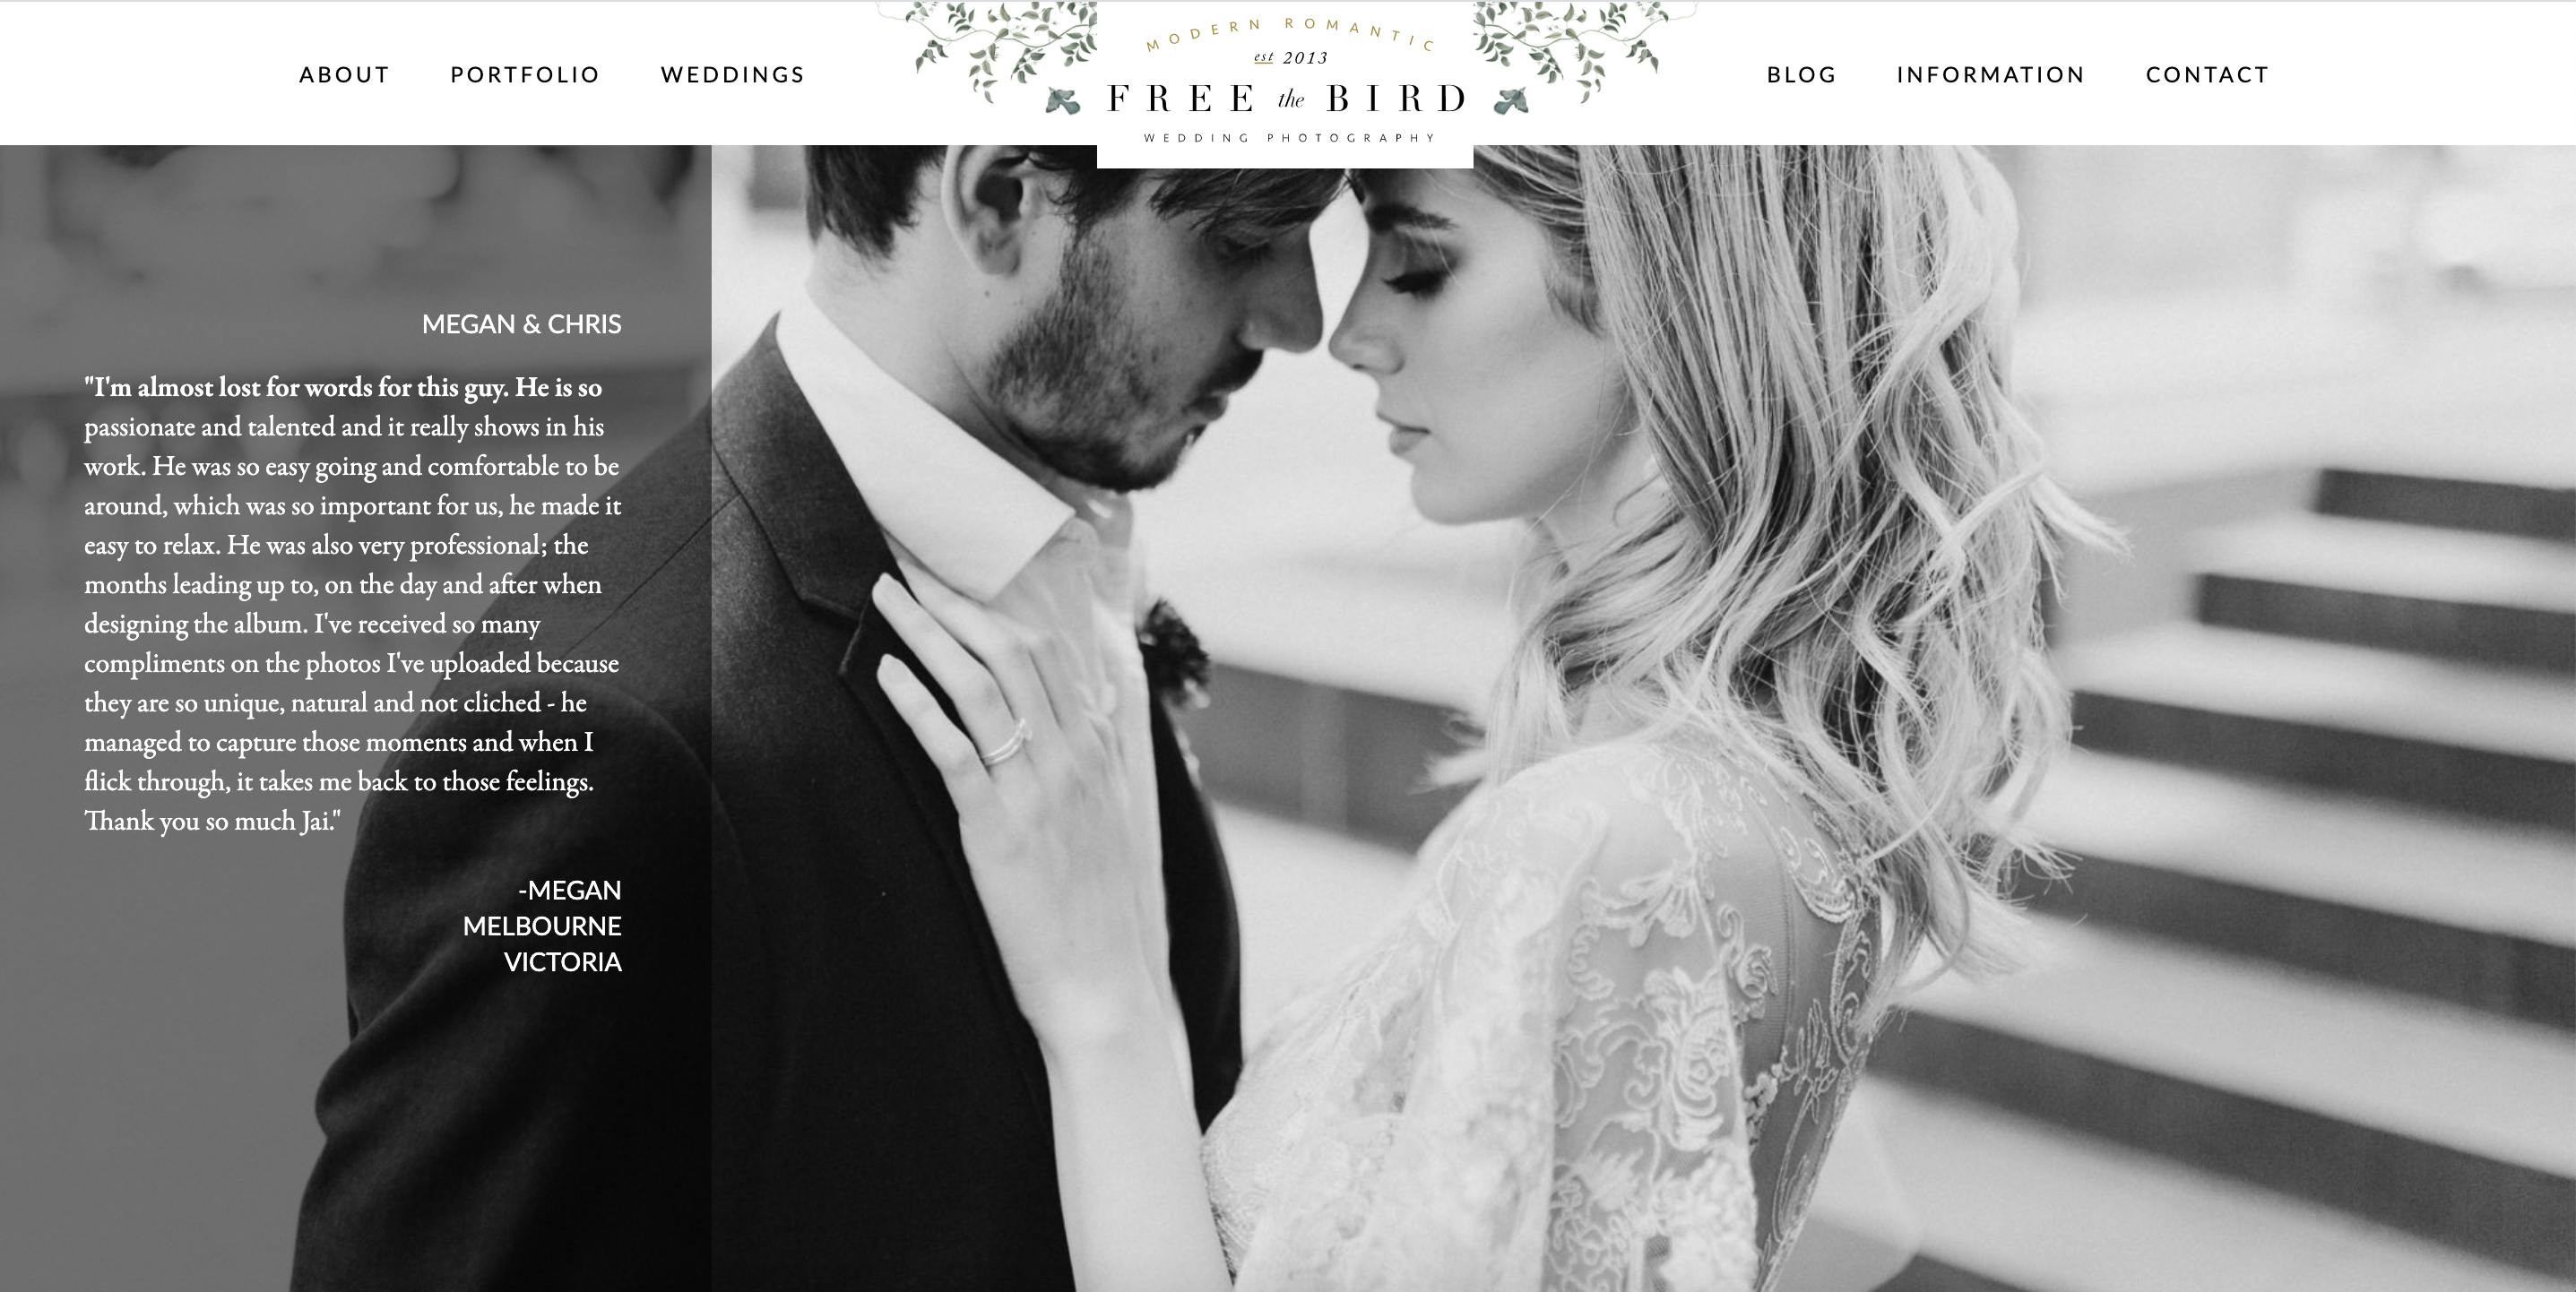 Wedding Photographer Jai Long uses a testimonial on his home page to book more clients.